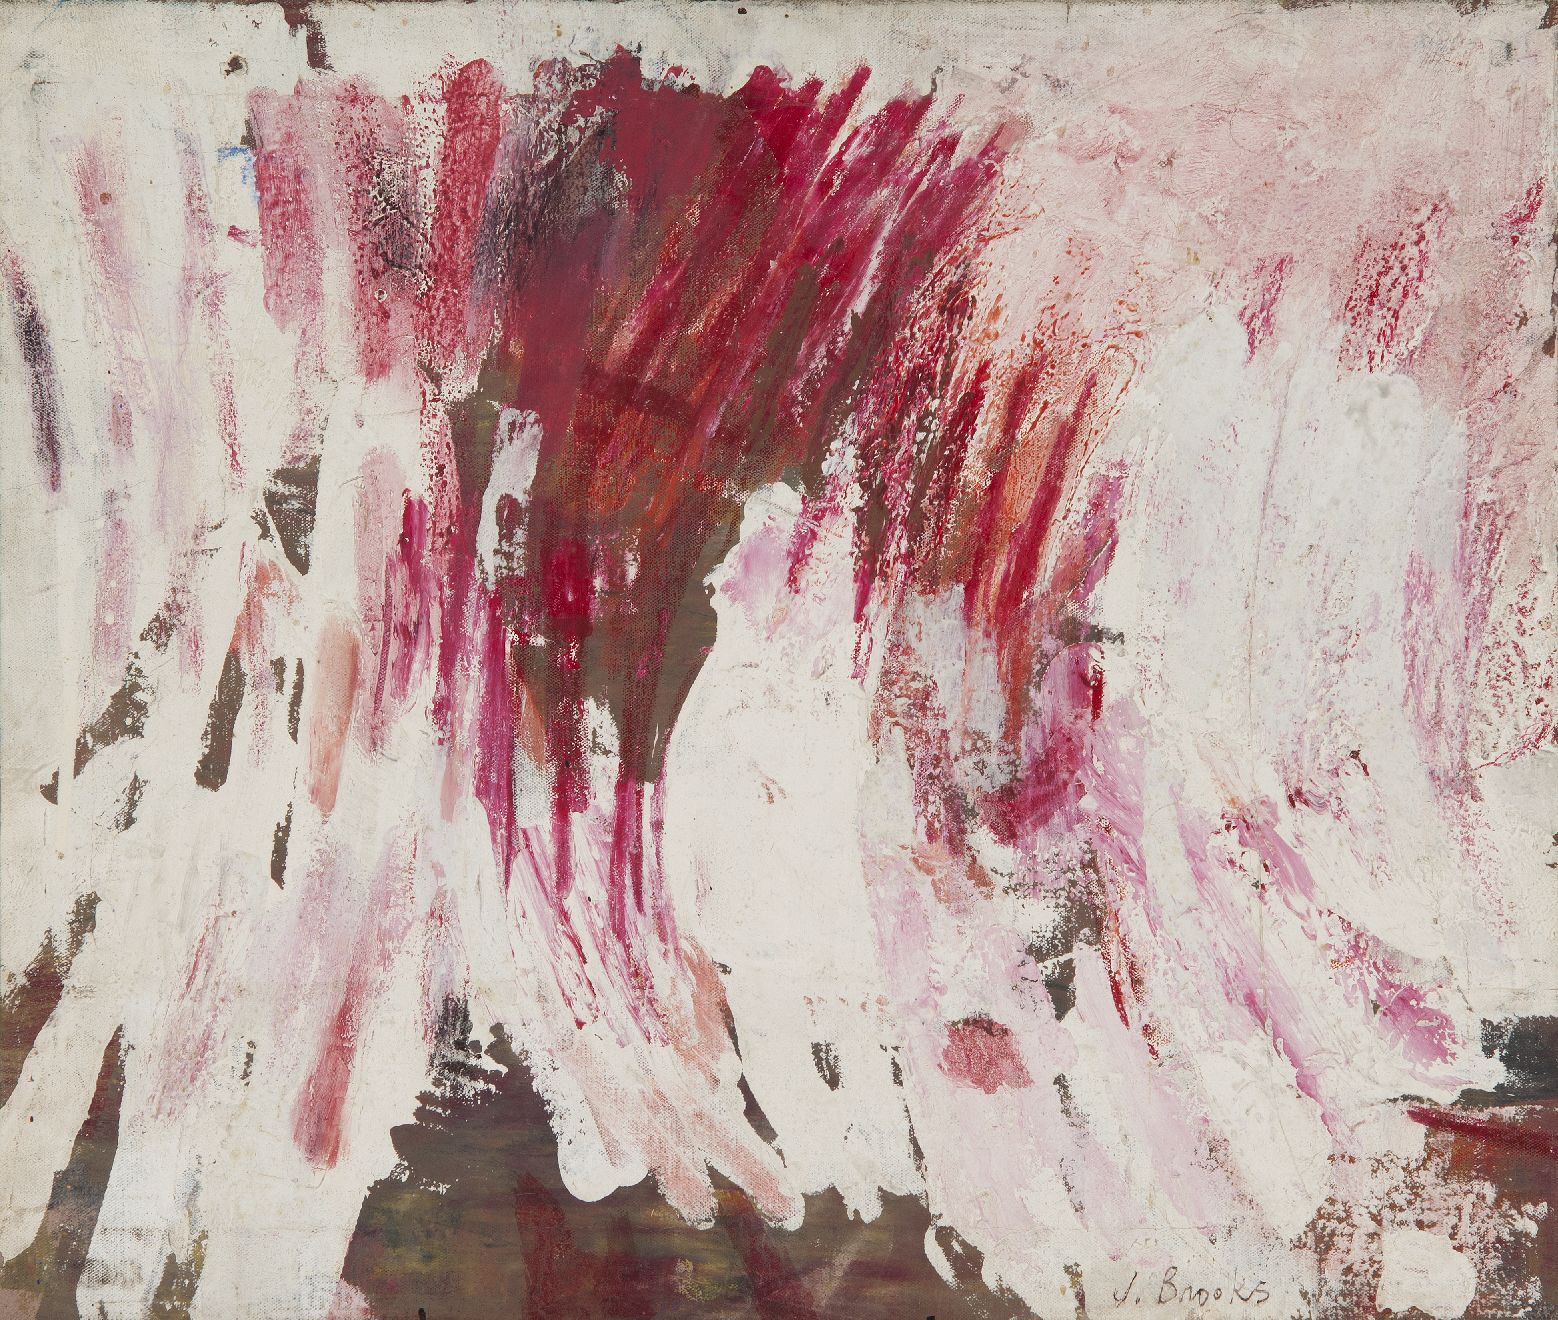 James Brooks' "Untitled" (1953, Oil on and crayon on canvas, 18" x 24") at the Parrish Art Museum, Water Mill, NY